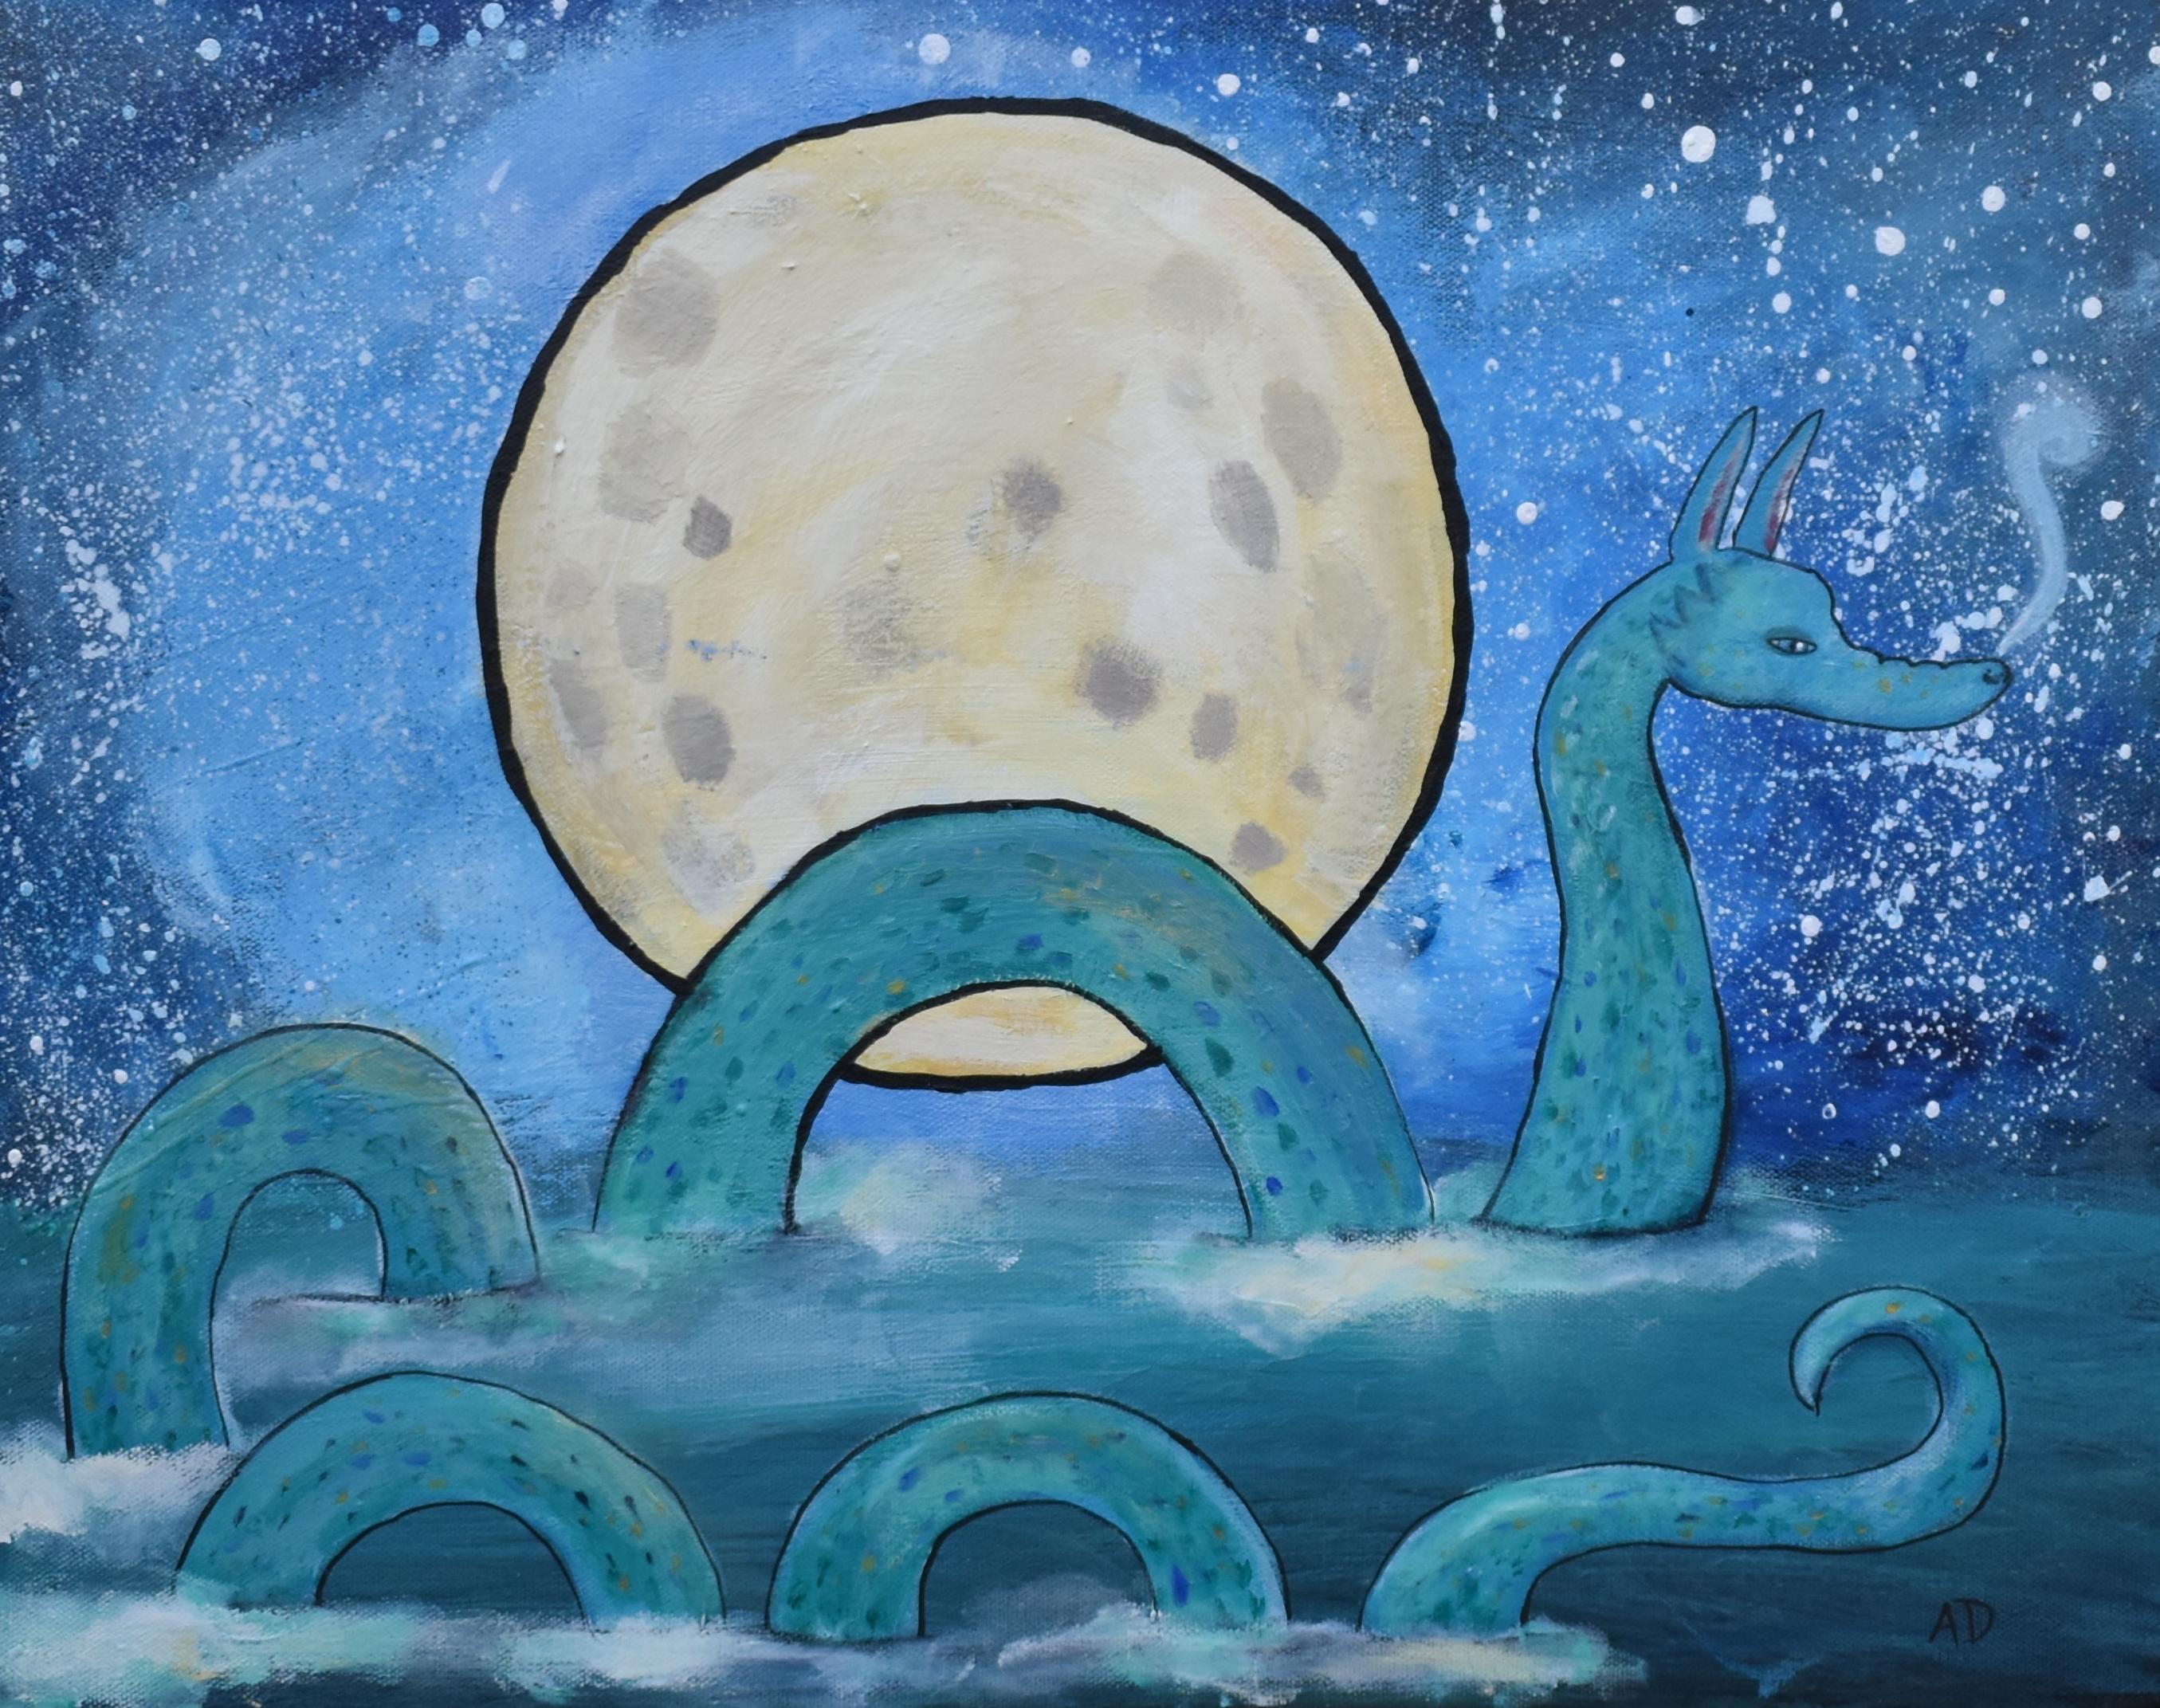 The Sea Serpent - Art by Andrea Doss